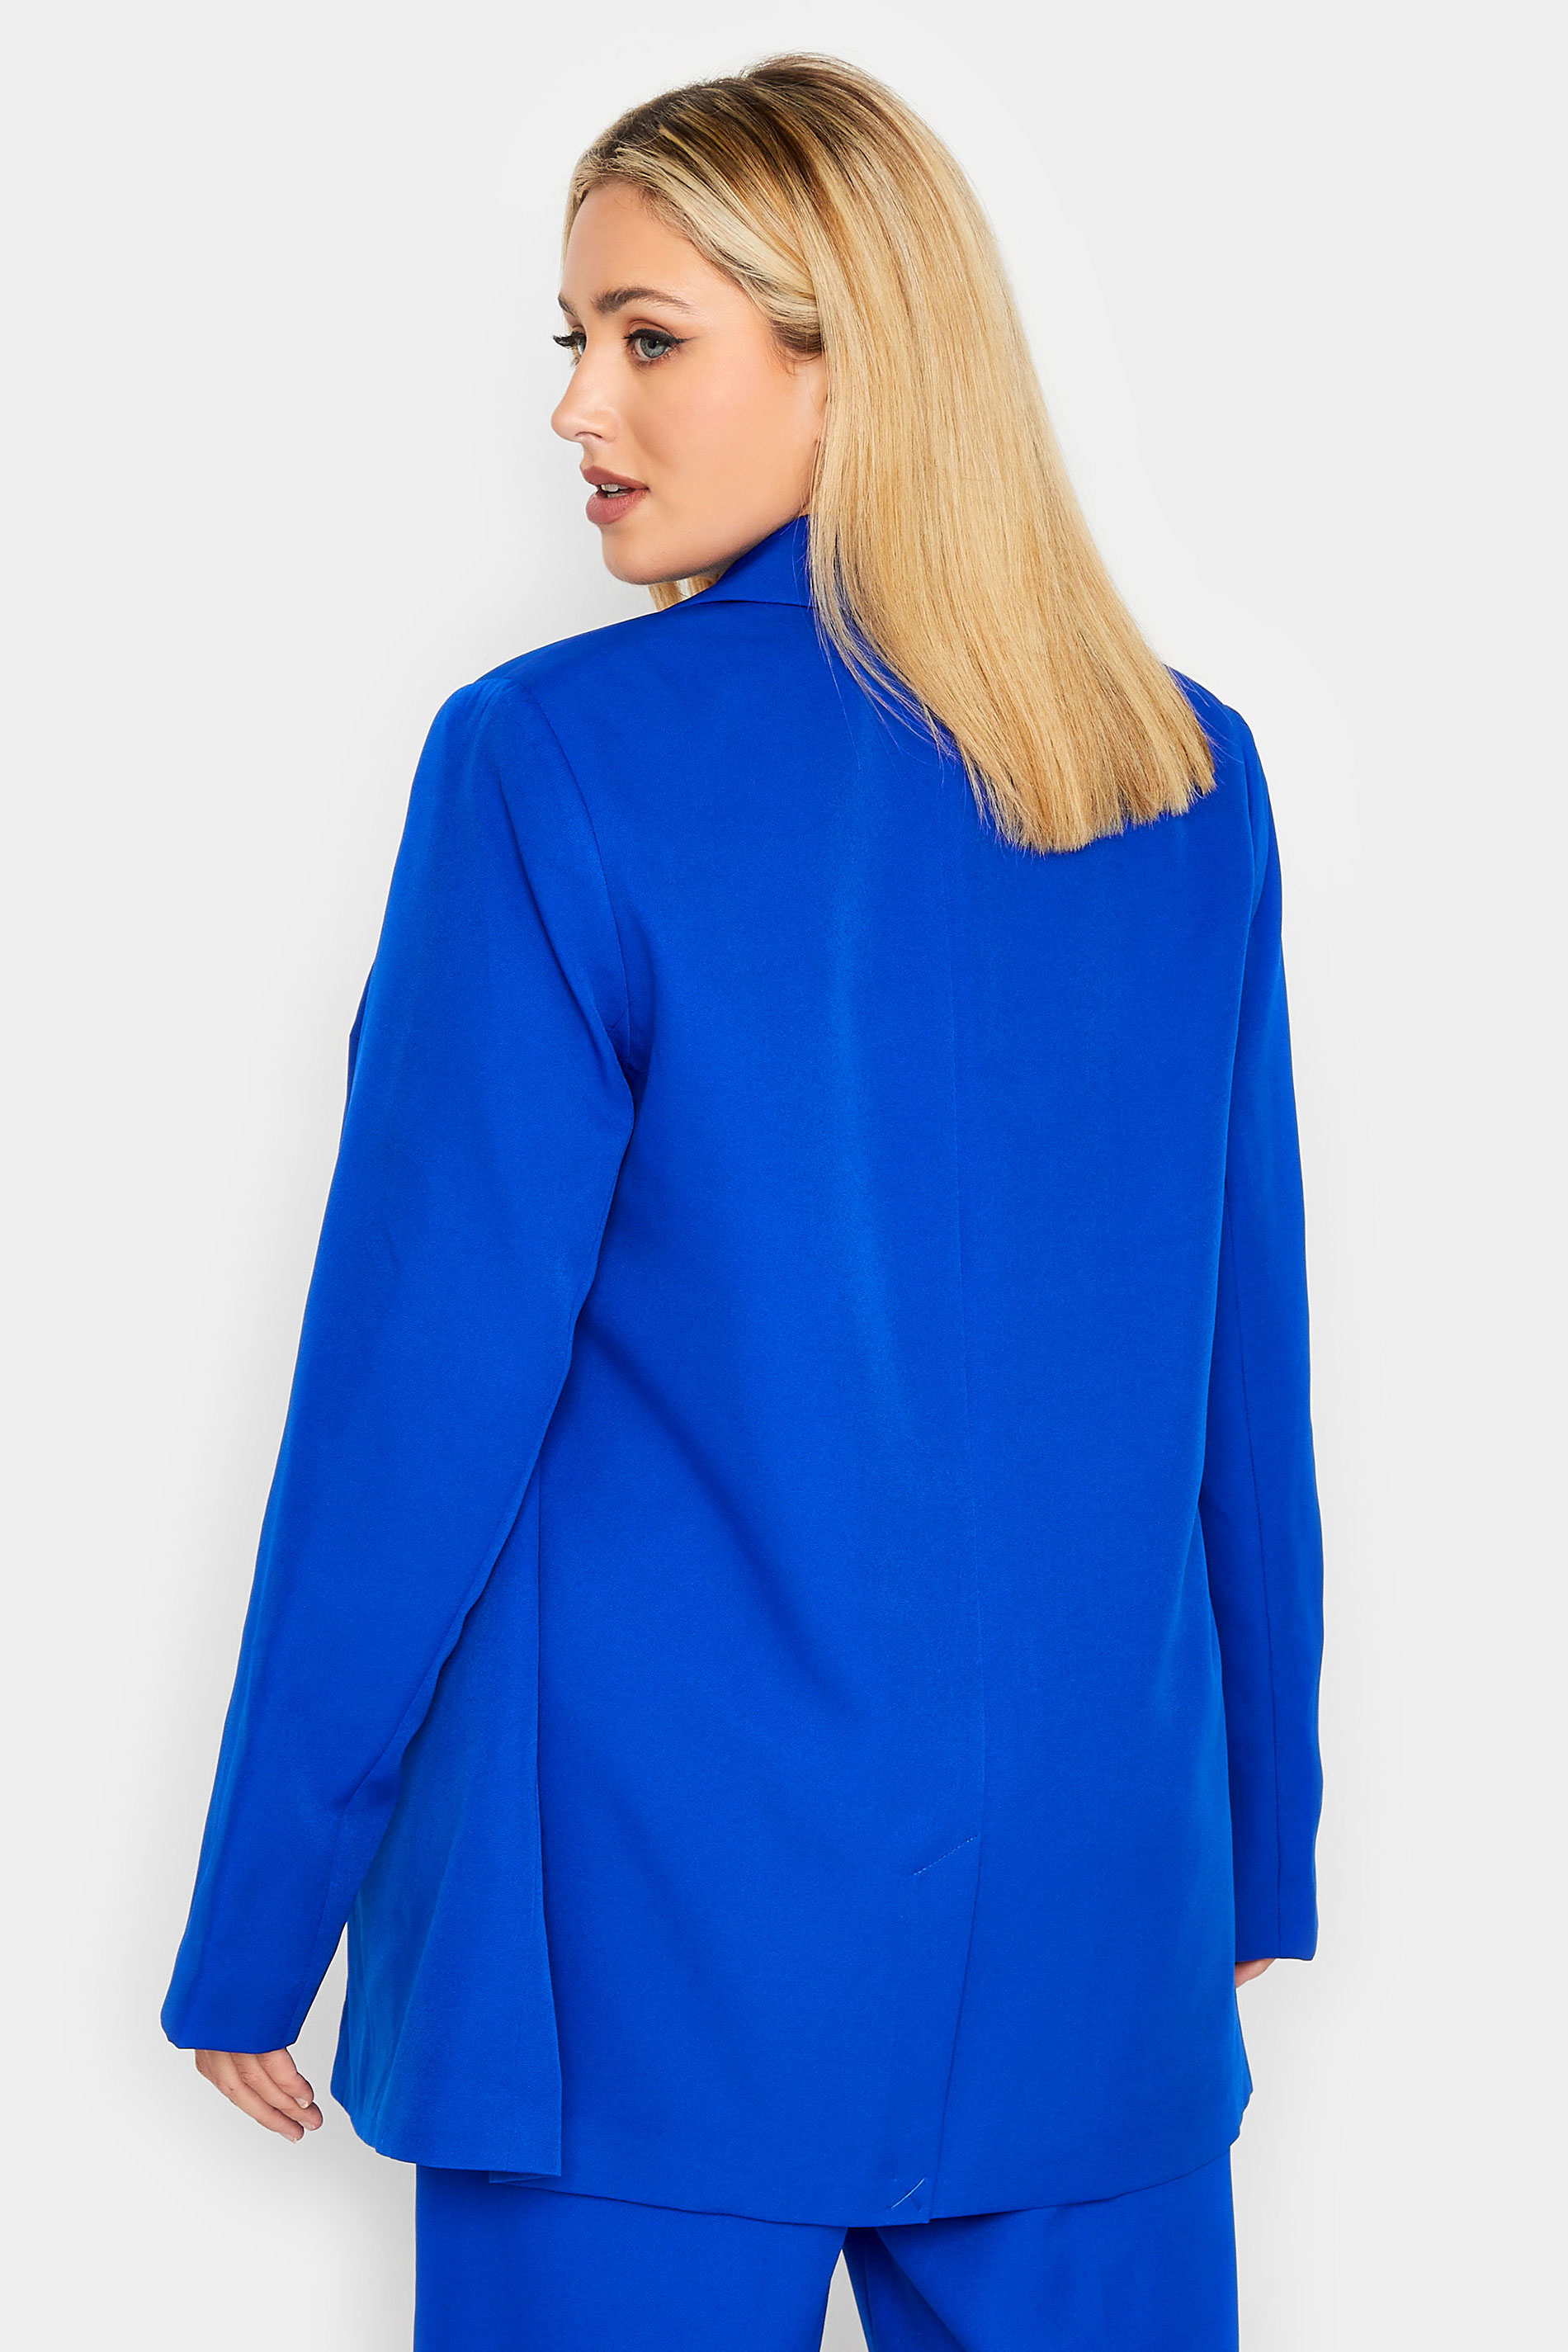 Plus Size Cobalt Blue Tailored Blazer | Yours Clothing 3